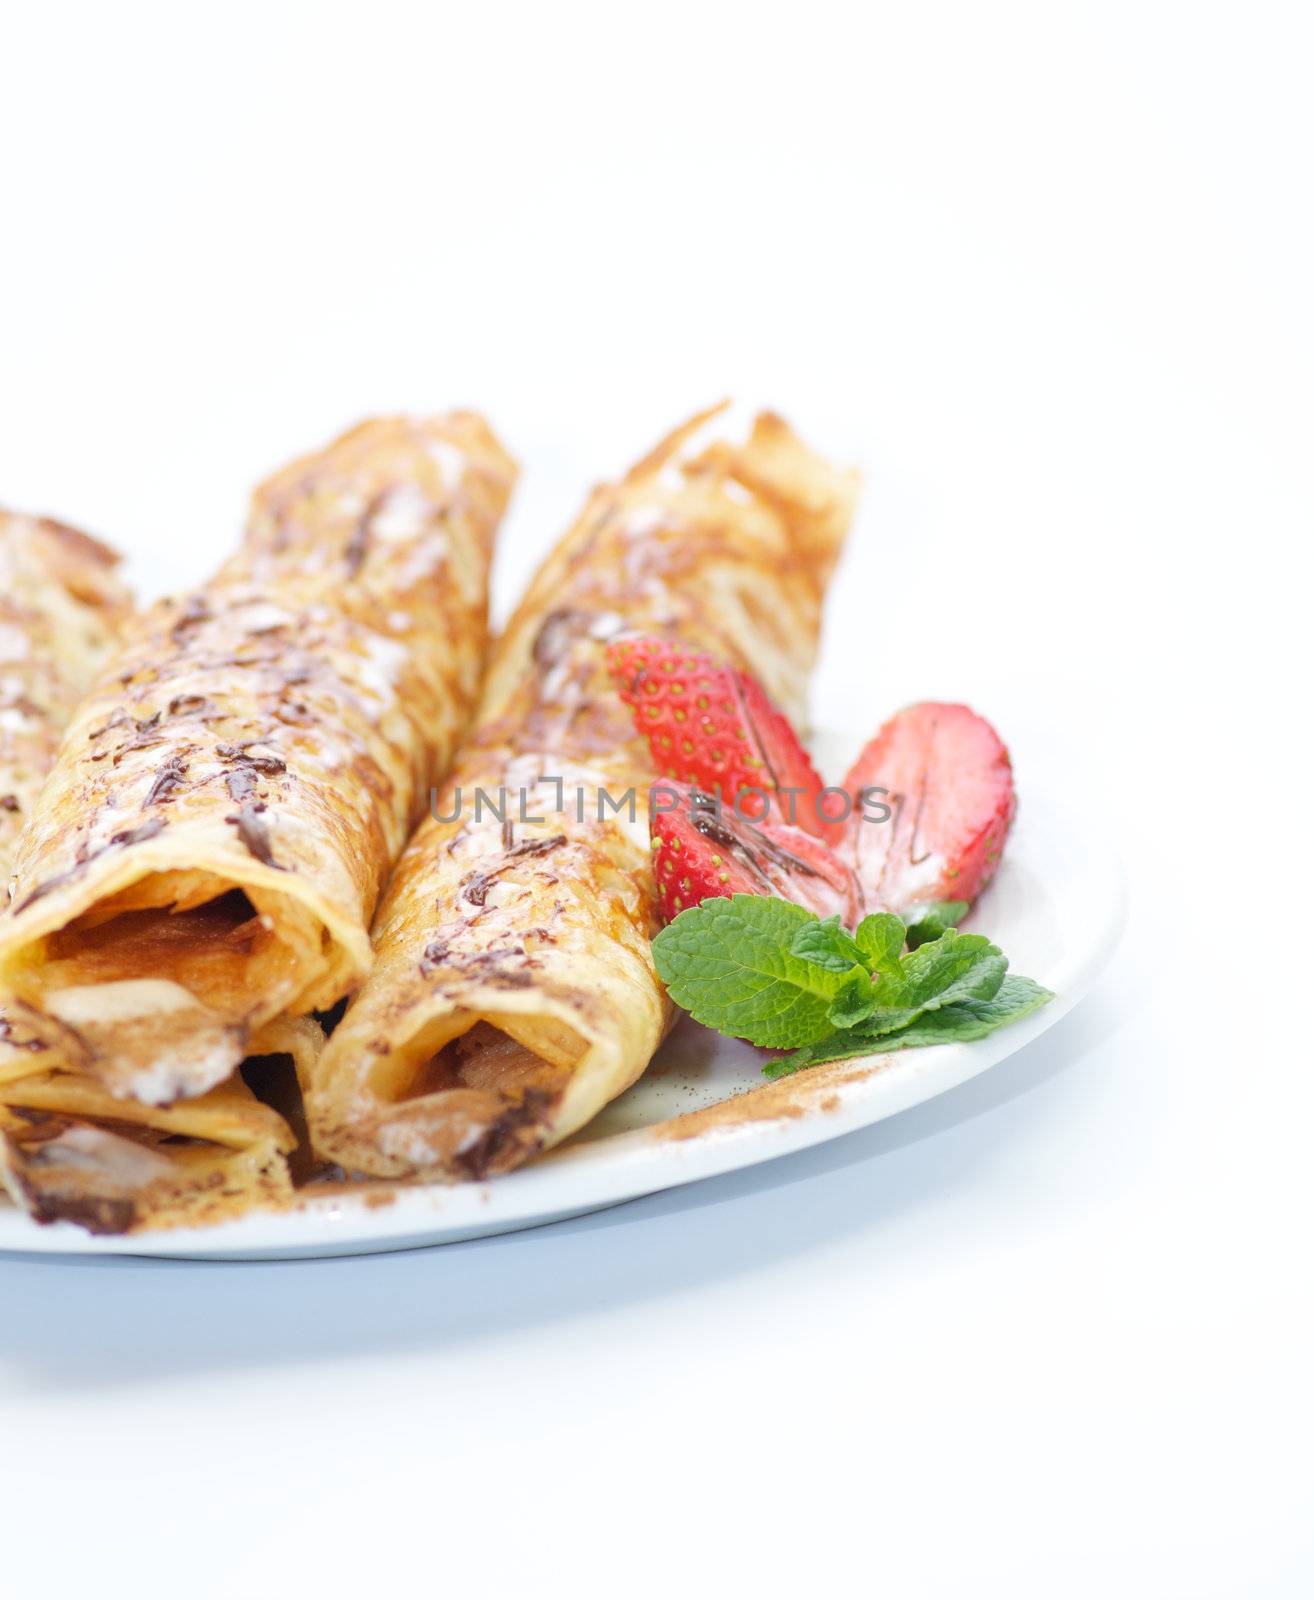 Pancake tubules with a strawberry, glaze and leaflets of mint